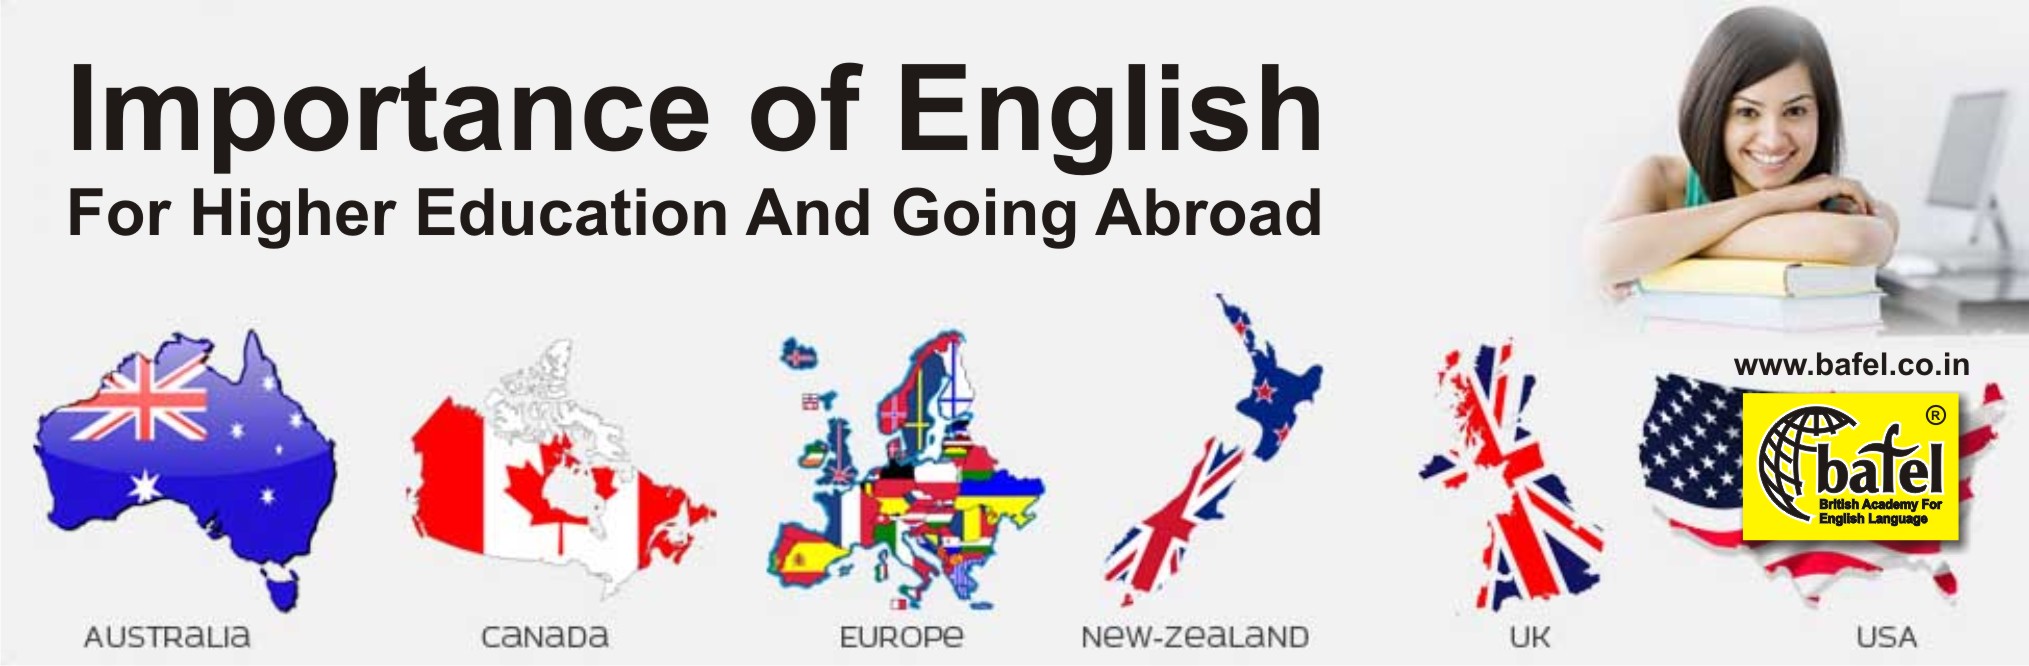 what is the importance of english in higher education